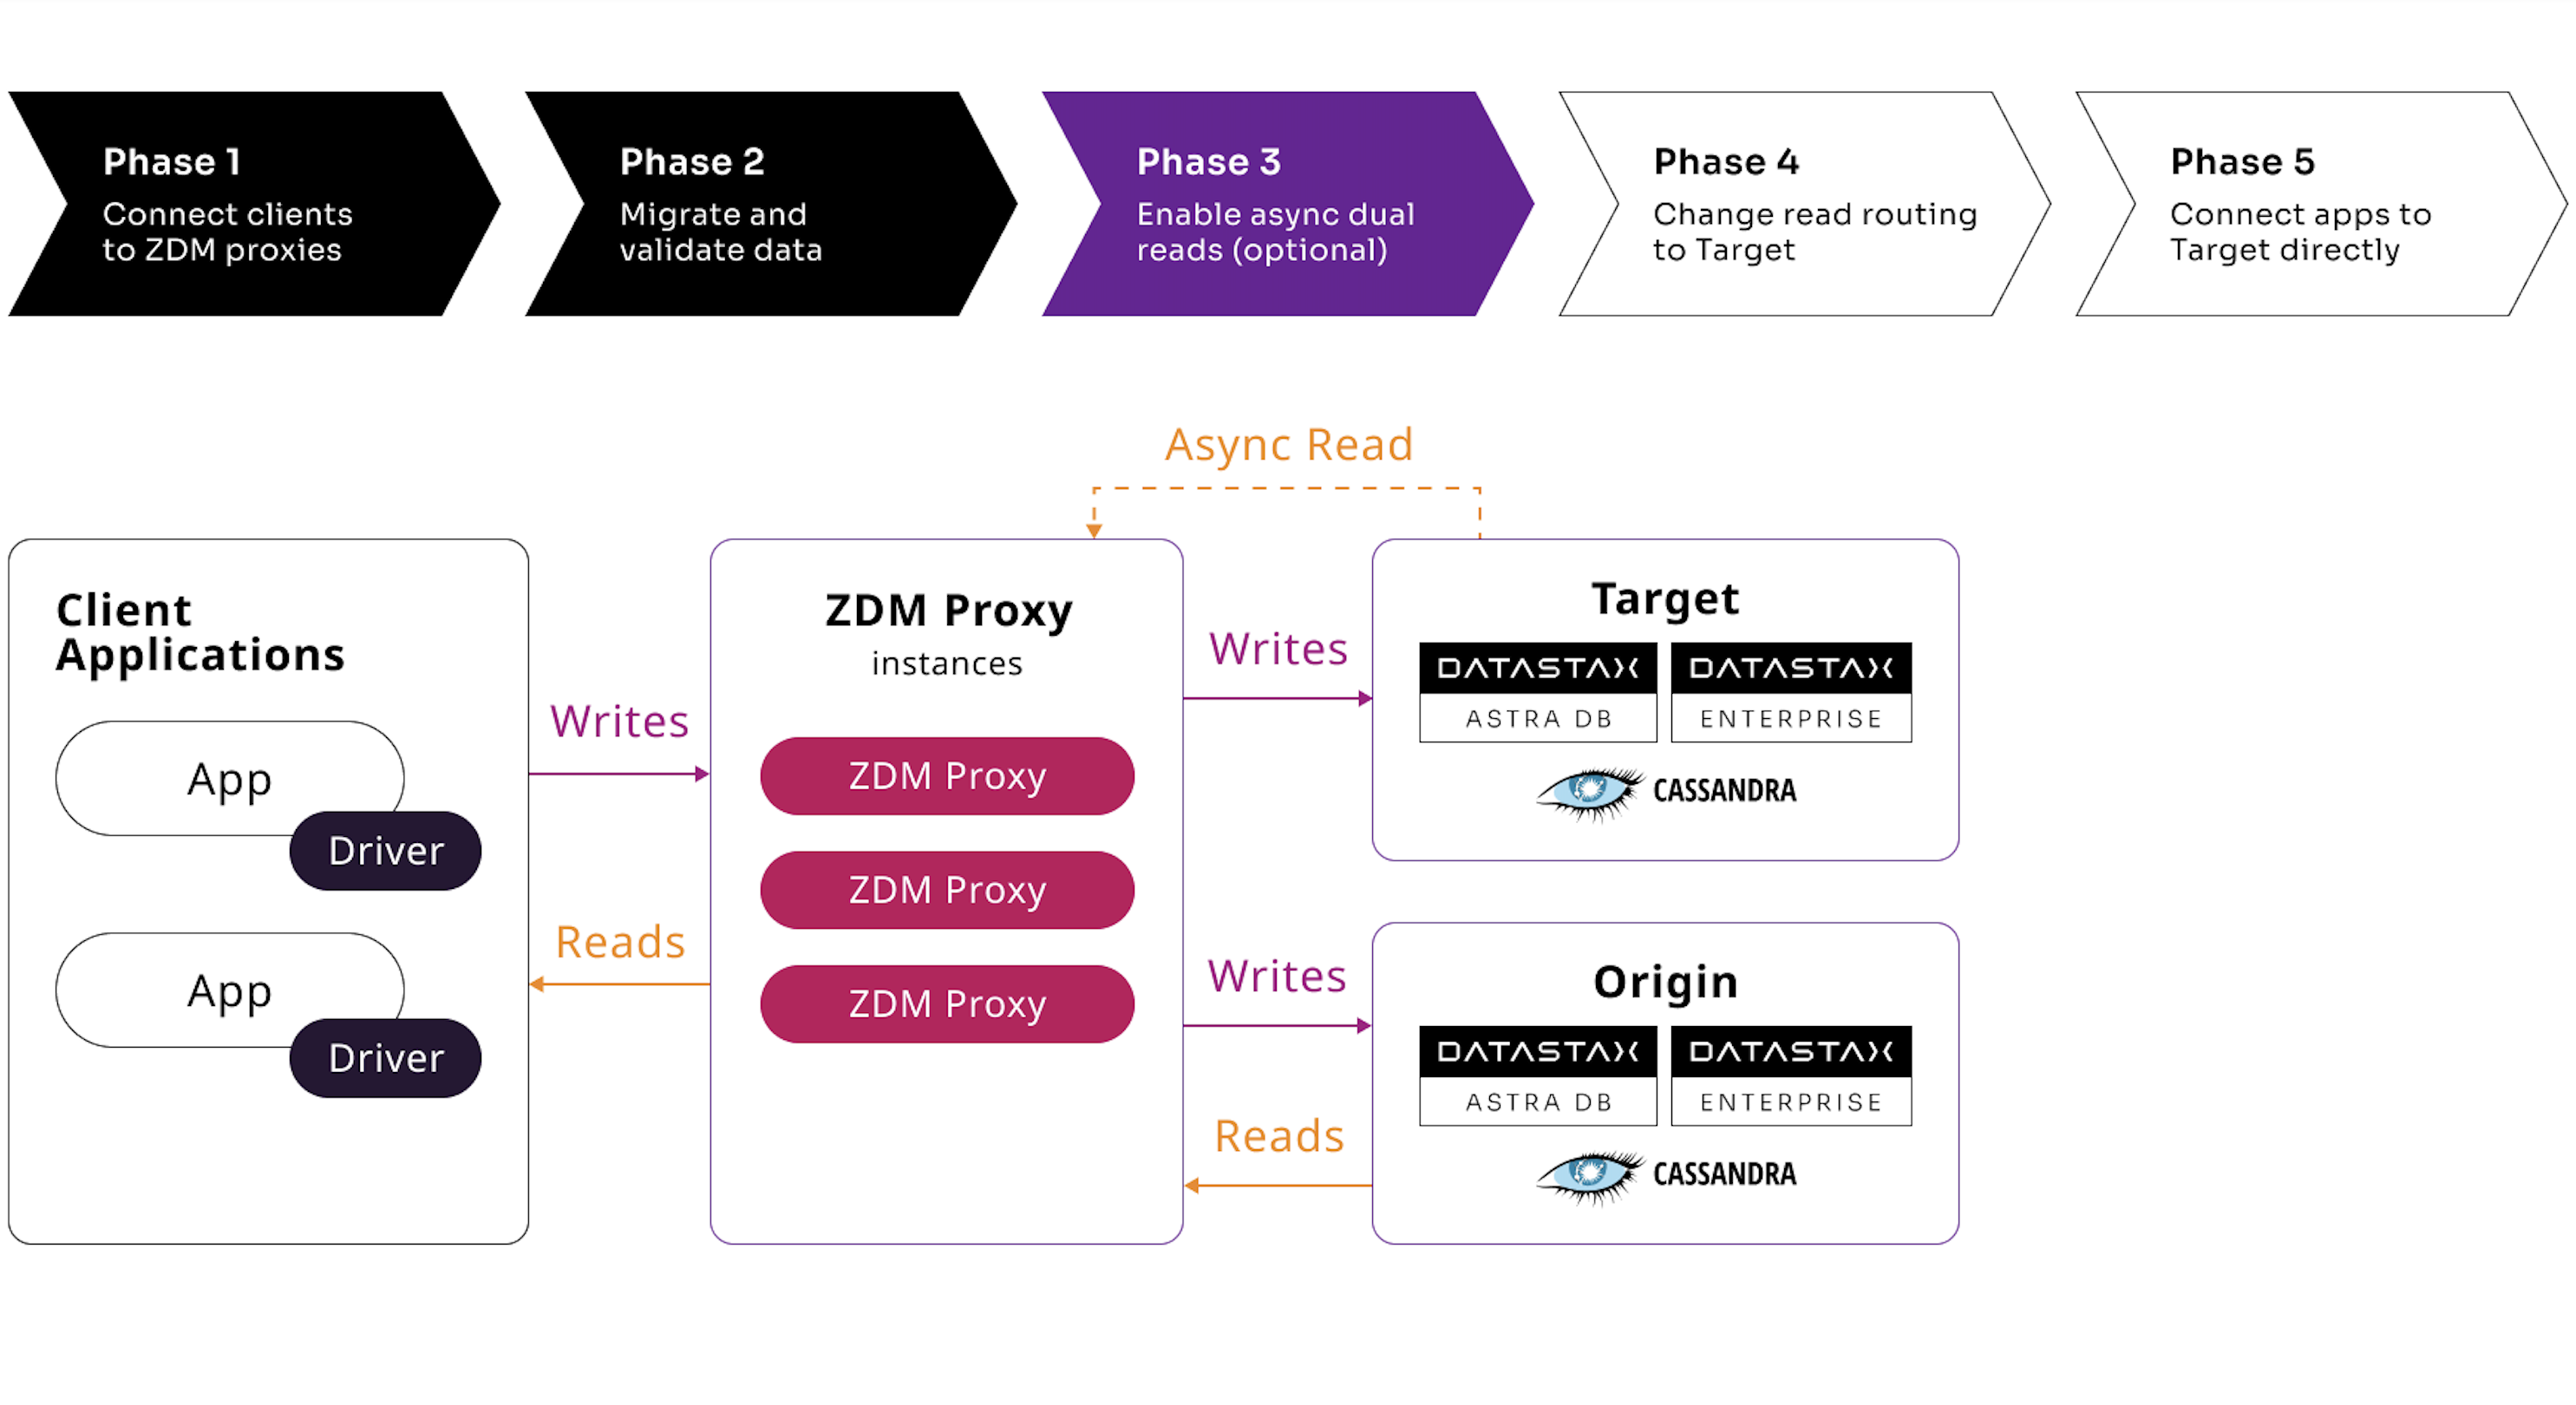 Phase 3 diagram shows optional step enabling async dual reads to test performance of Target.